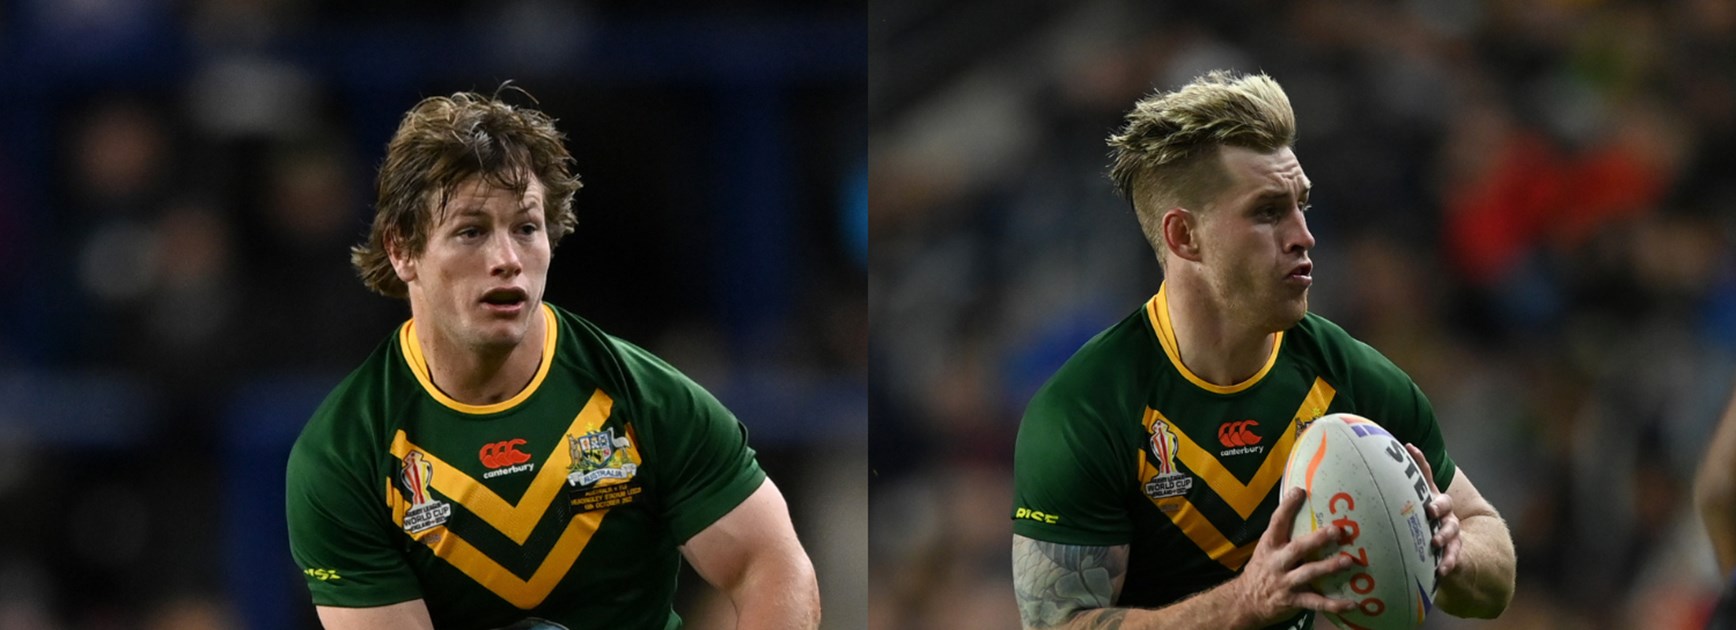 Munster, Grant to don the green and gold